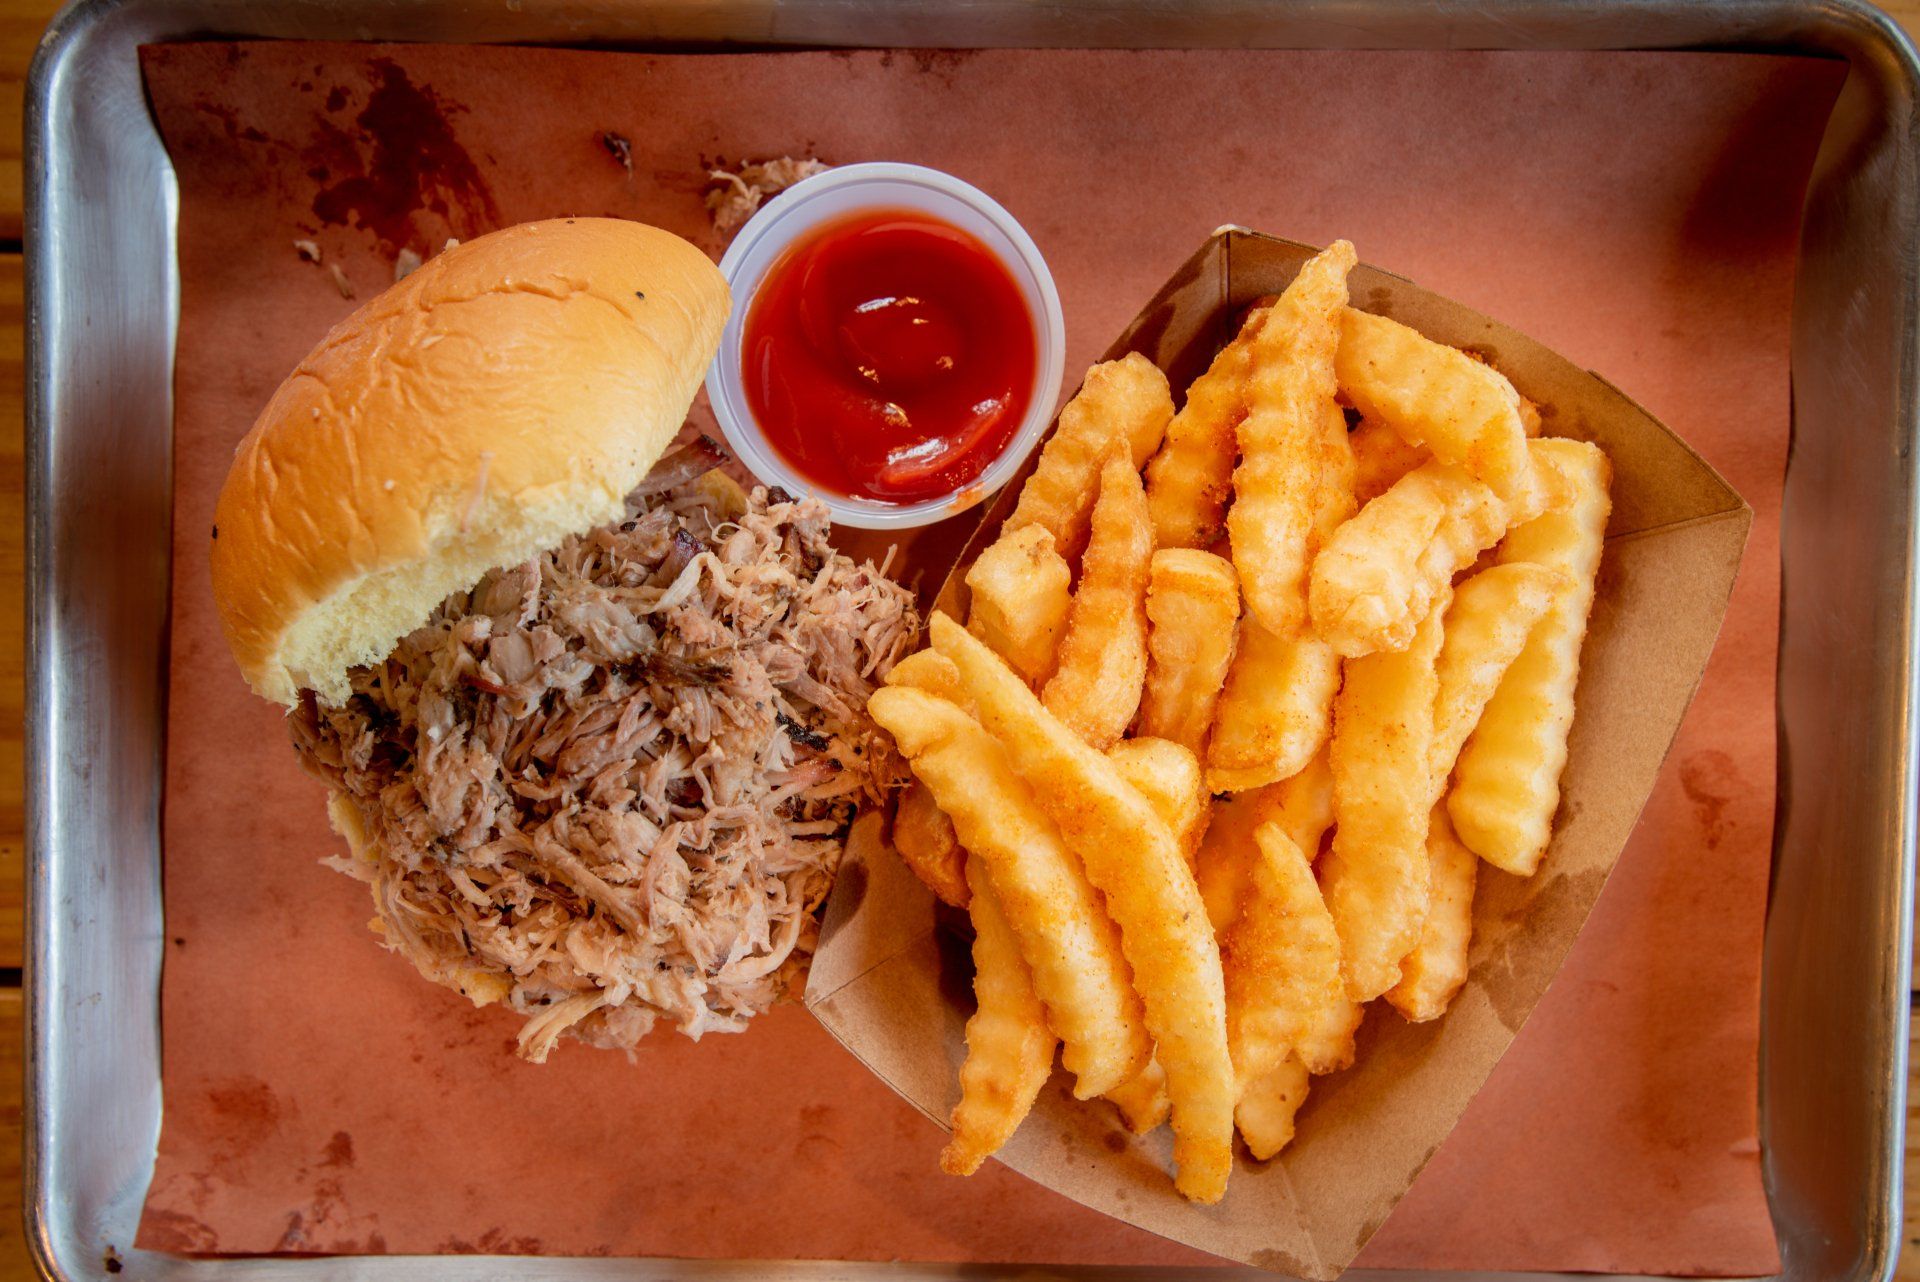 BBQ Sandwich and Fries